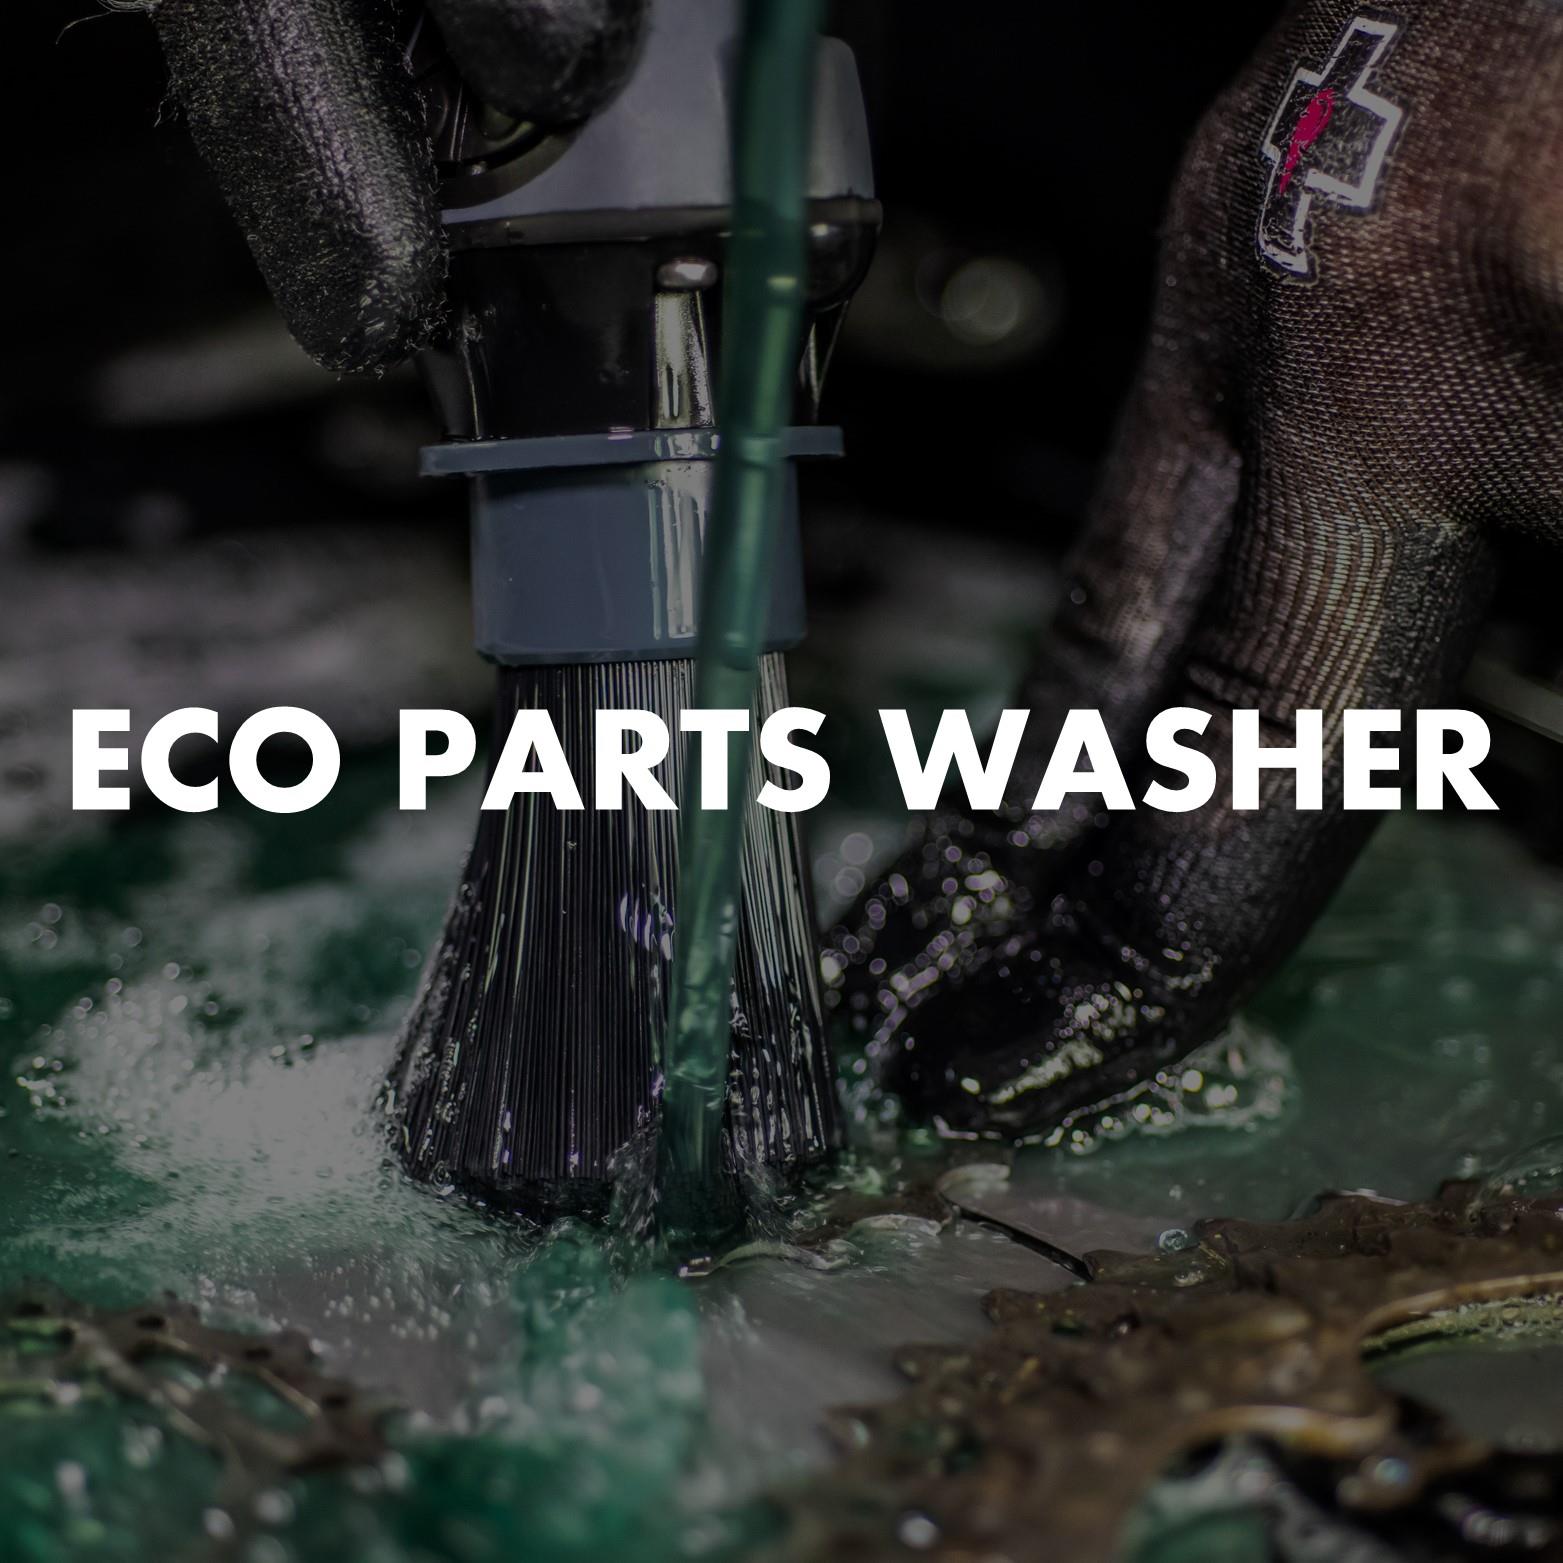 Eco Parts Washer